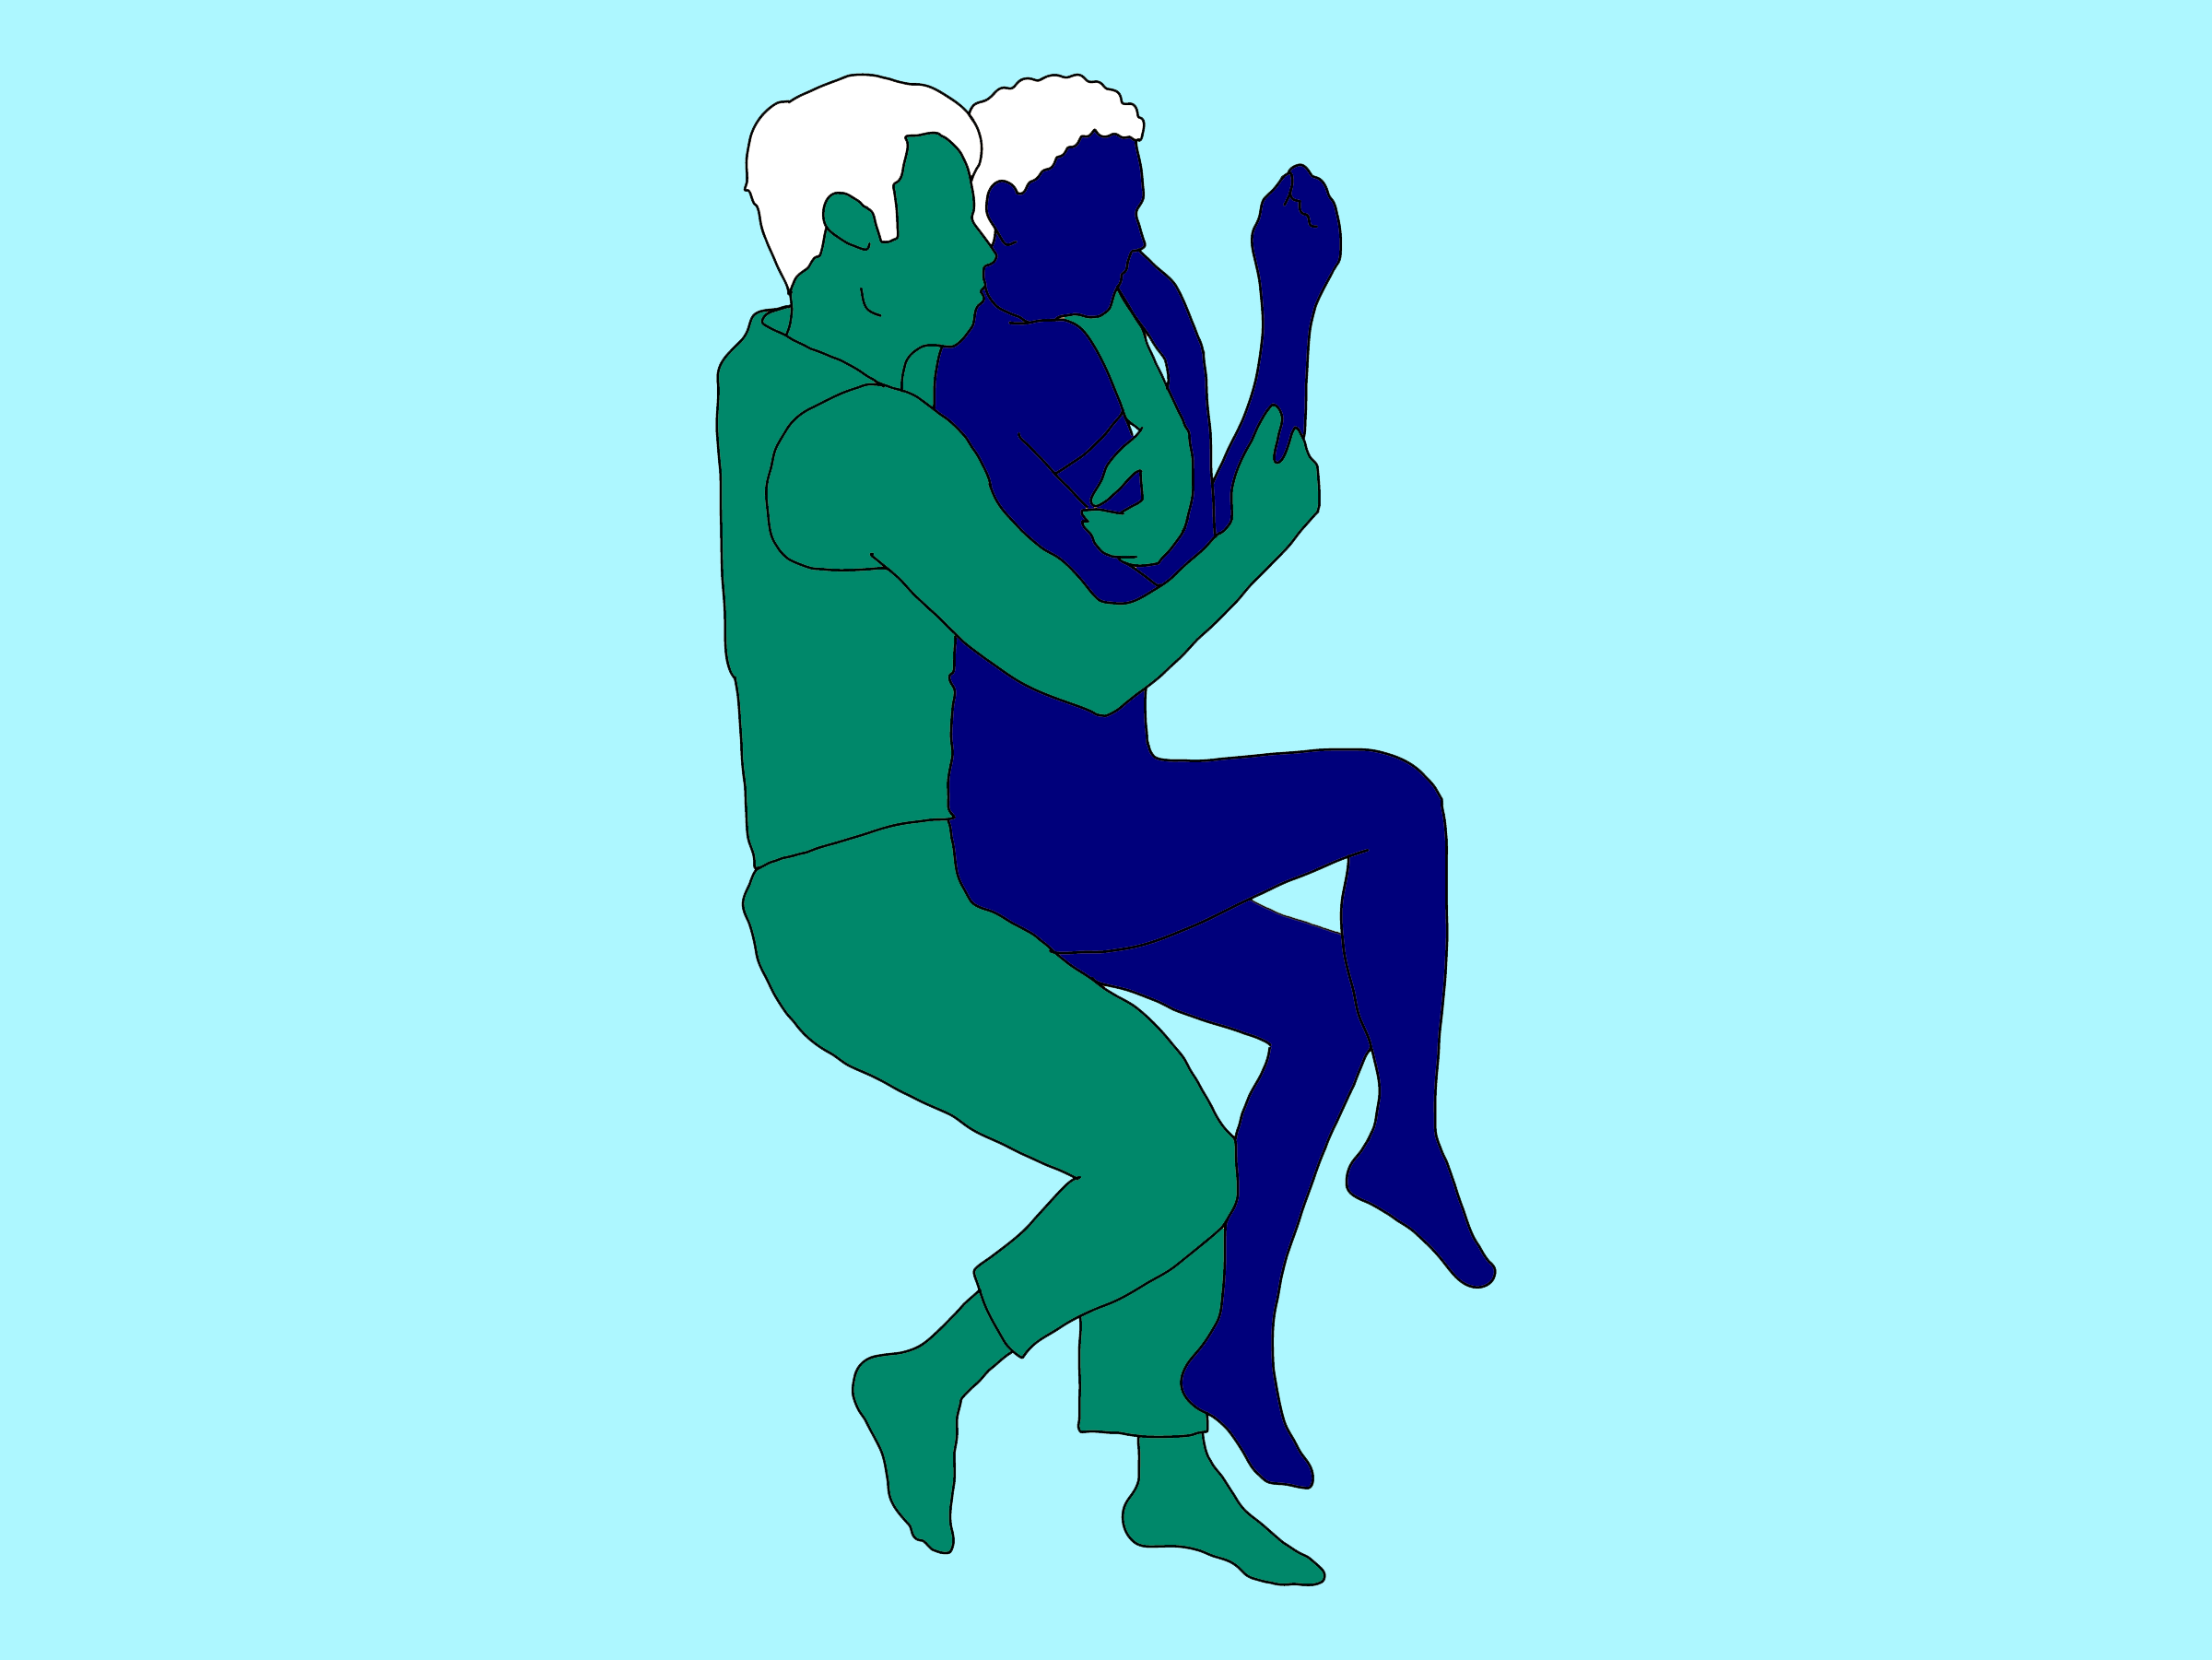 blue and green illustration of a couple in the spooning position